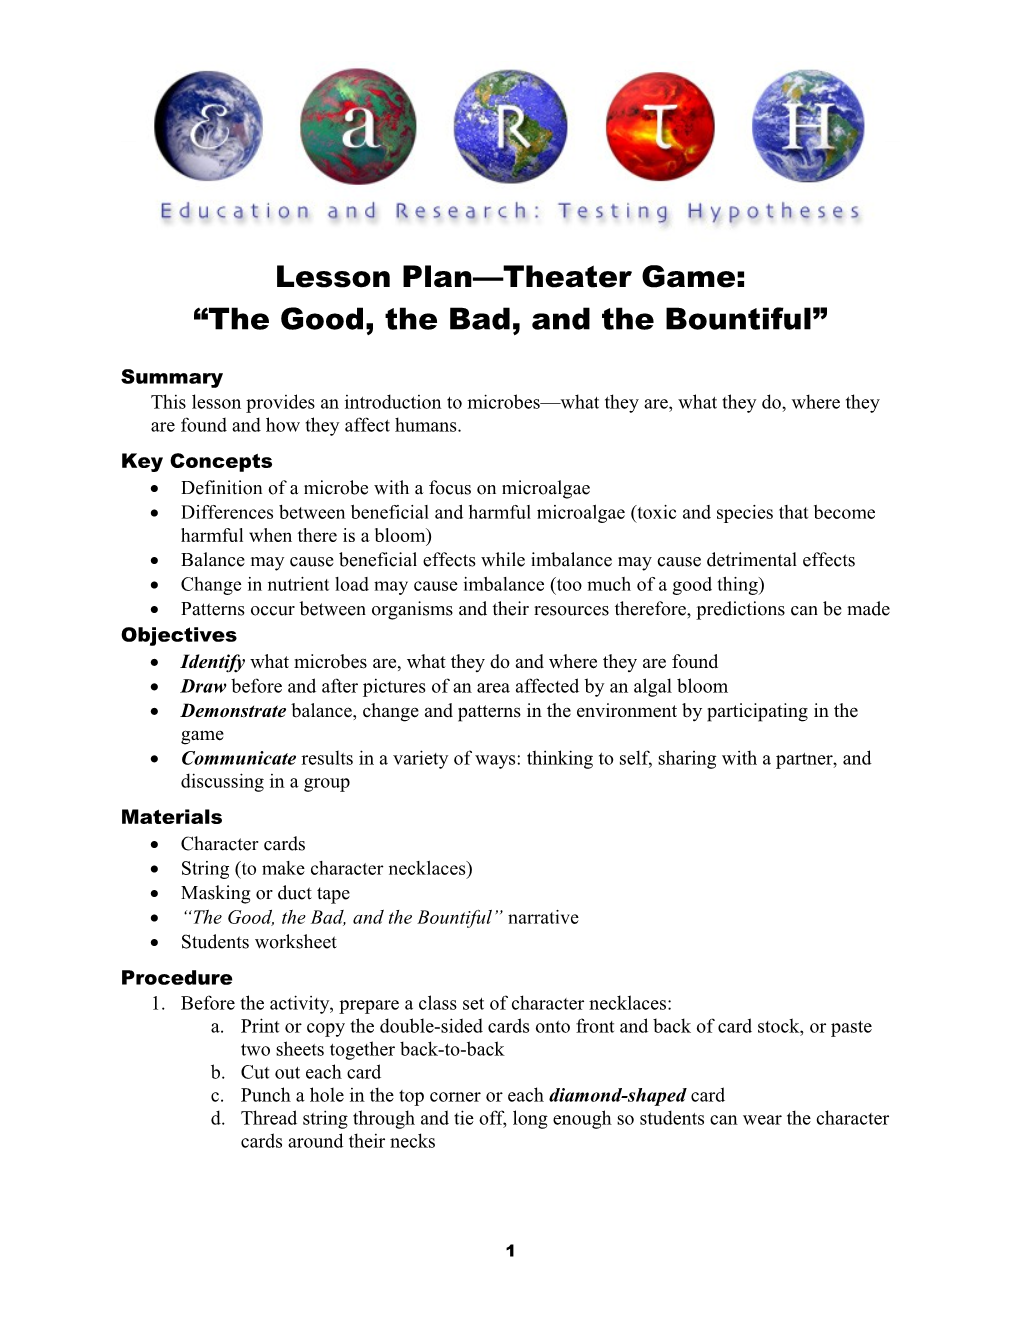 Lesson Plan Theater Game: the Good, the Bad, and the Bountiful